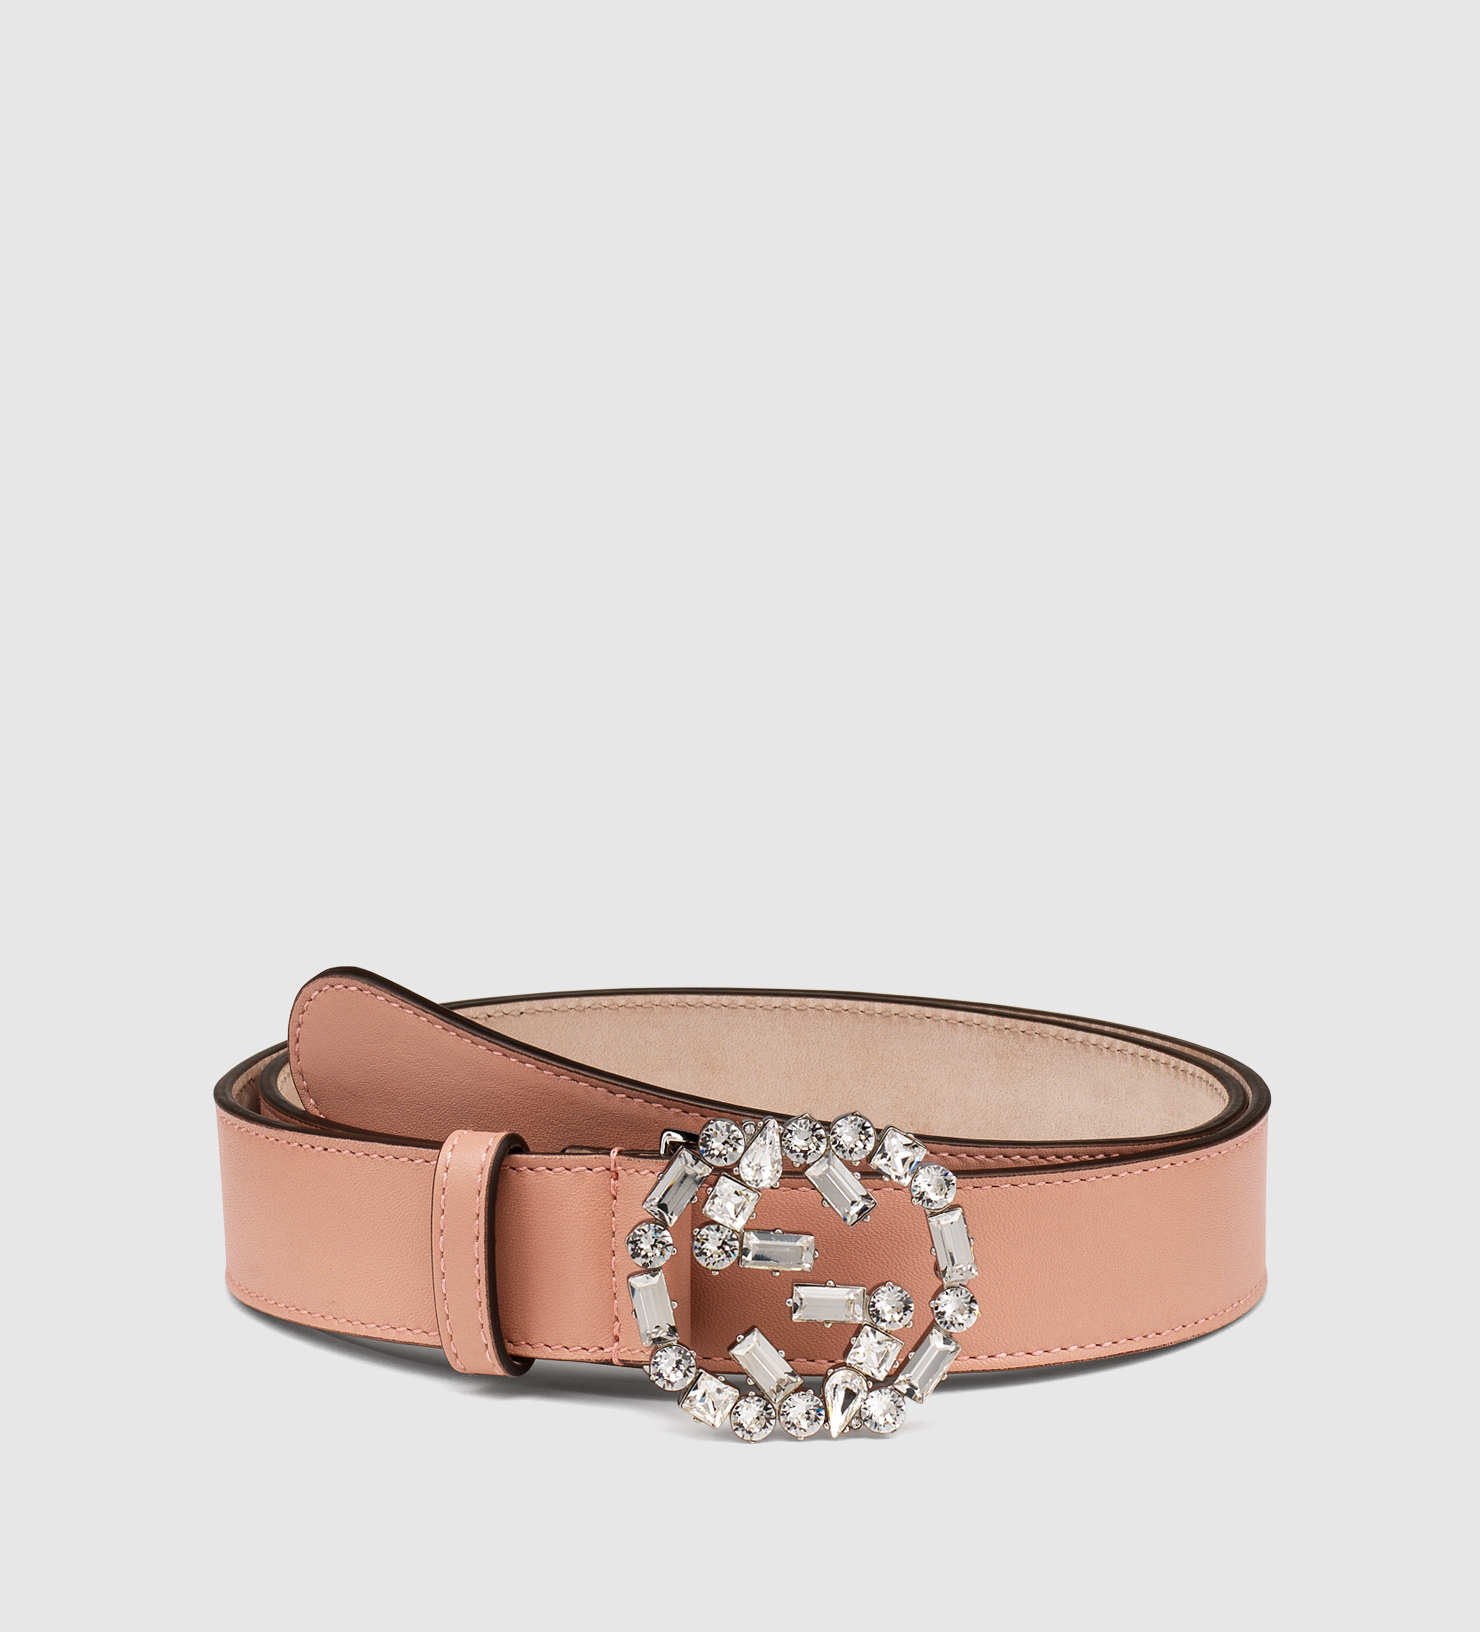 Gucci Pink Leather Belt With Crystal Interlocking G Buckle - Lyst